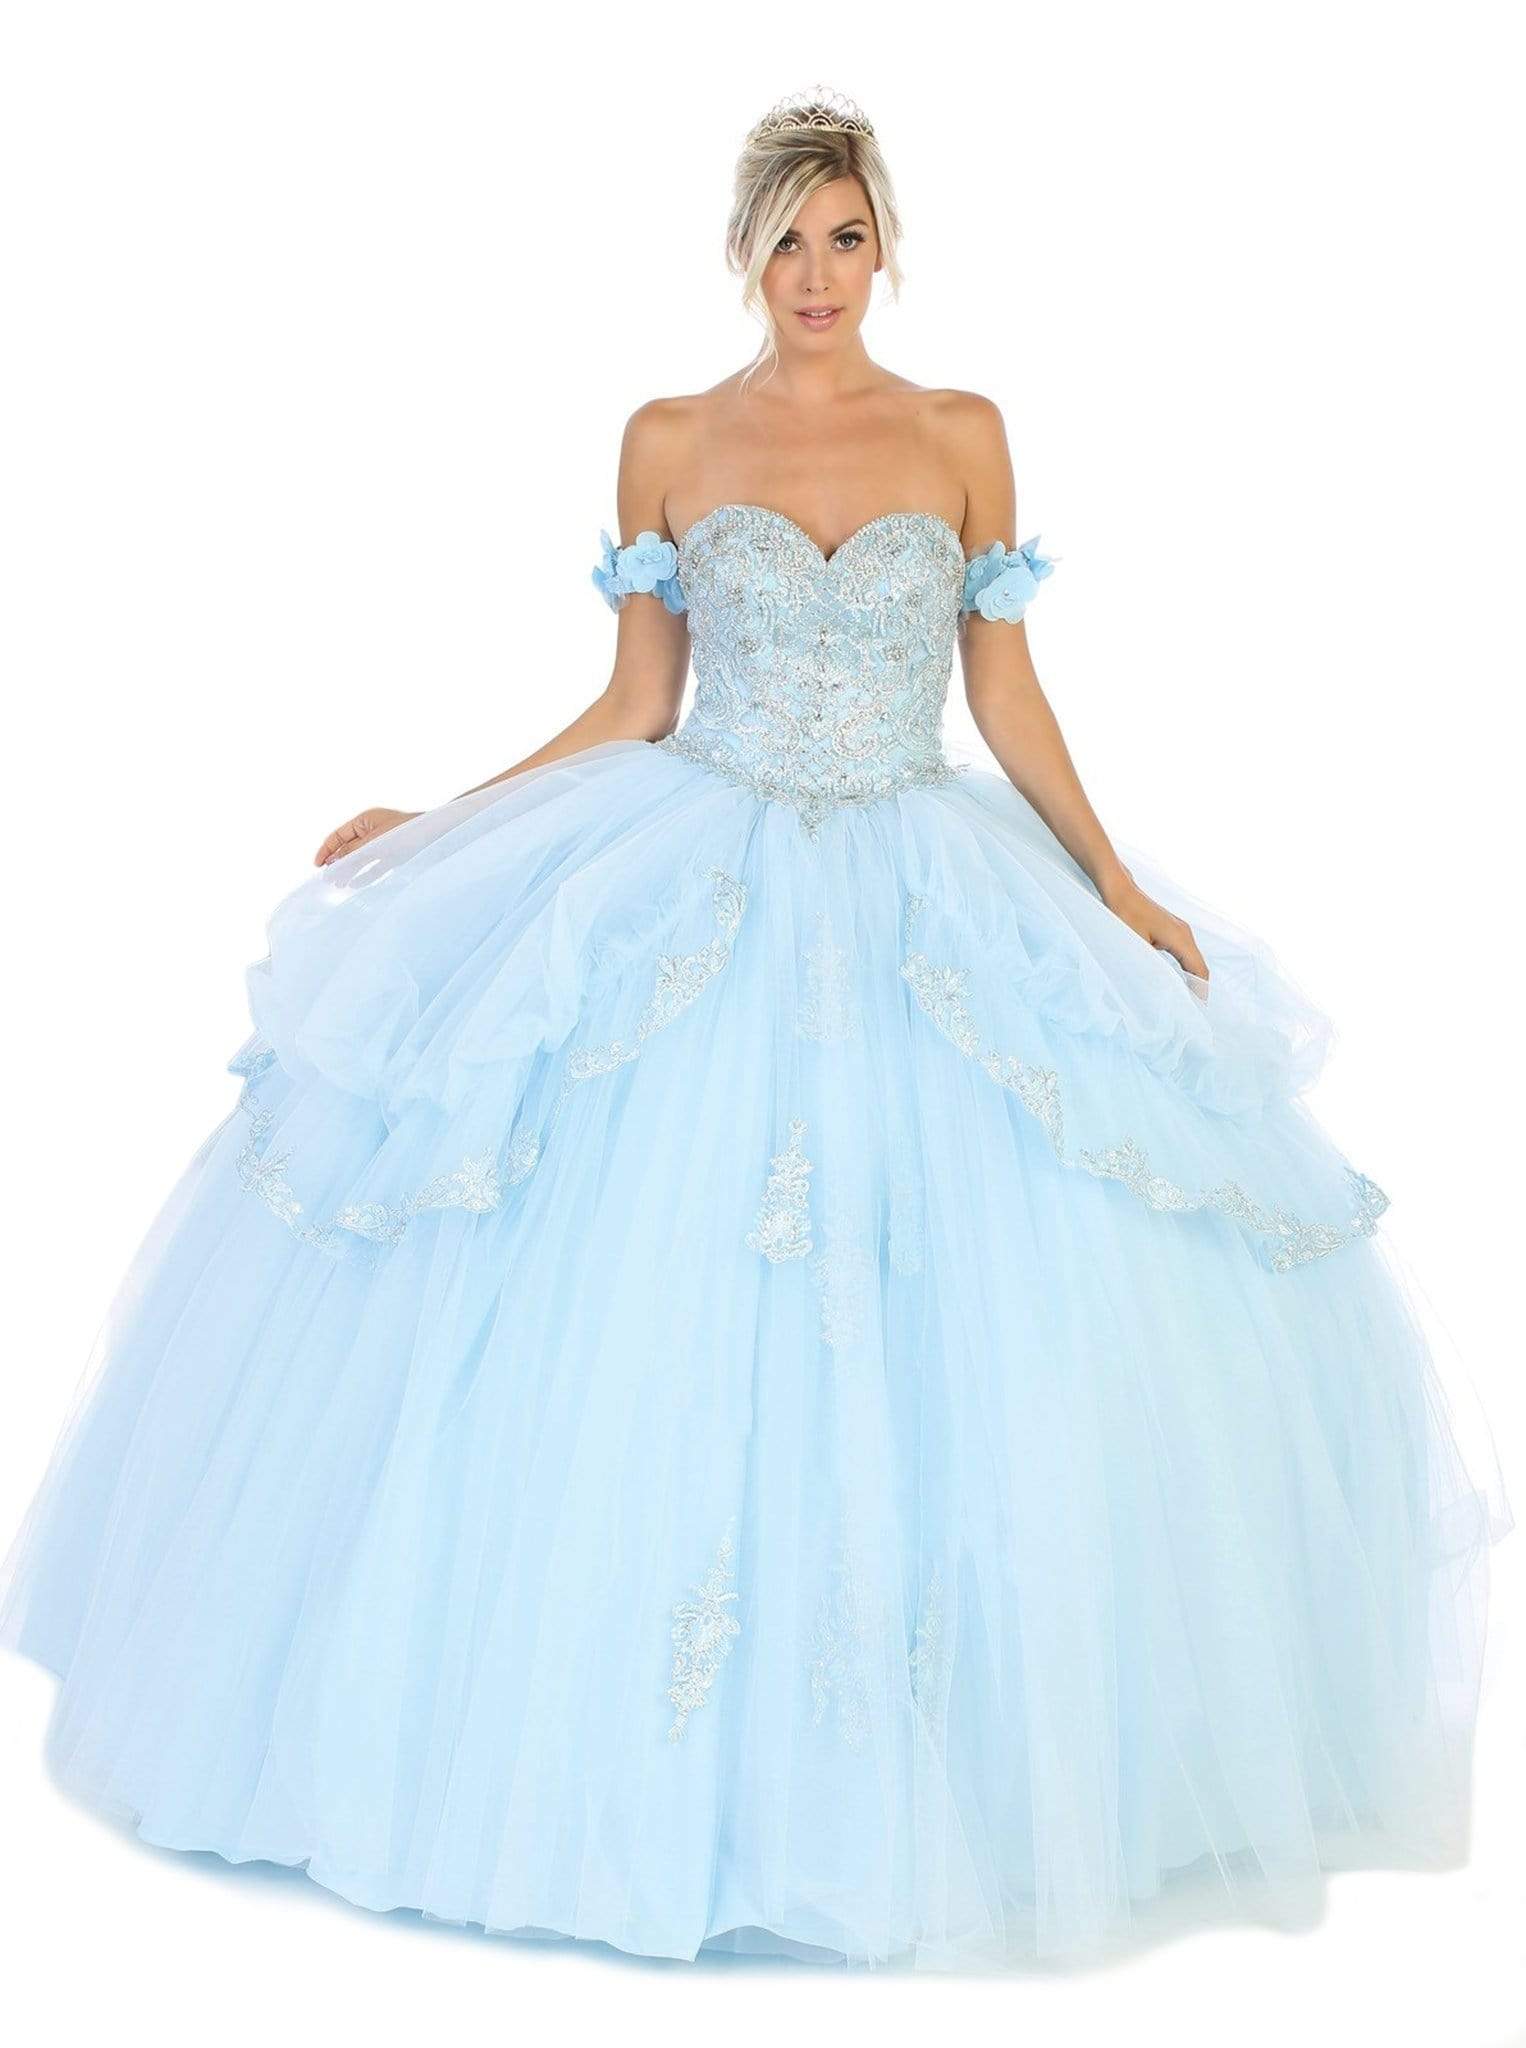 May Queen - LK120 Jeweled Sweetheart Bodice Ballgown